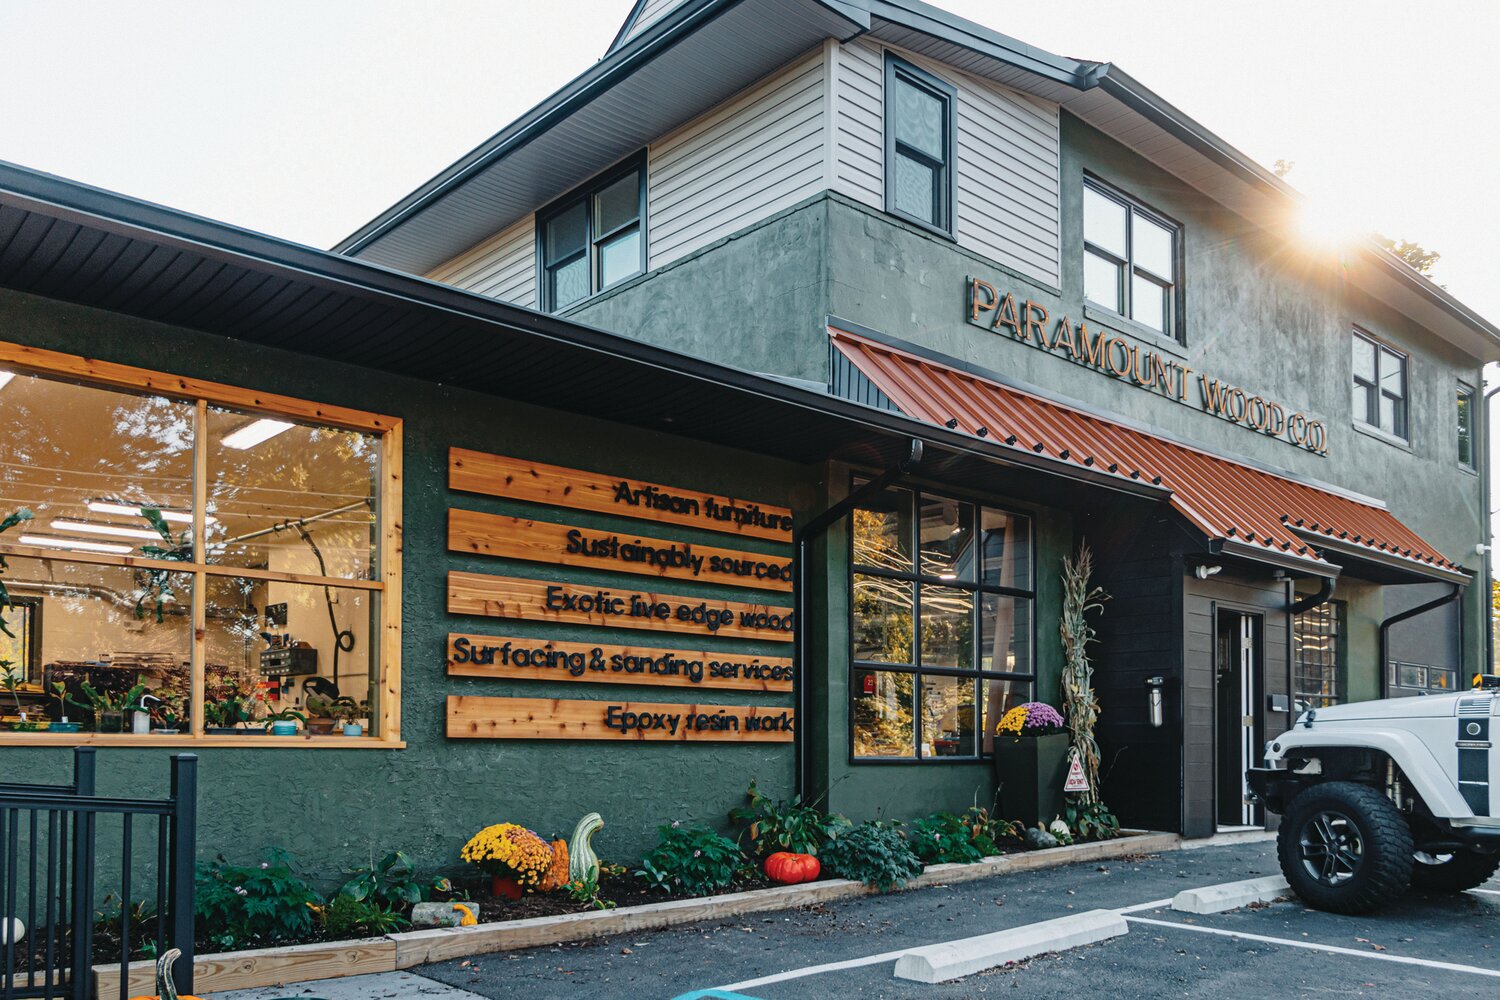 Paramount Wood Company is located at 6162 Lower York Road in Solebury Township.